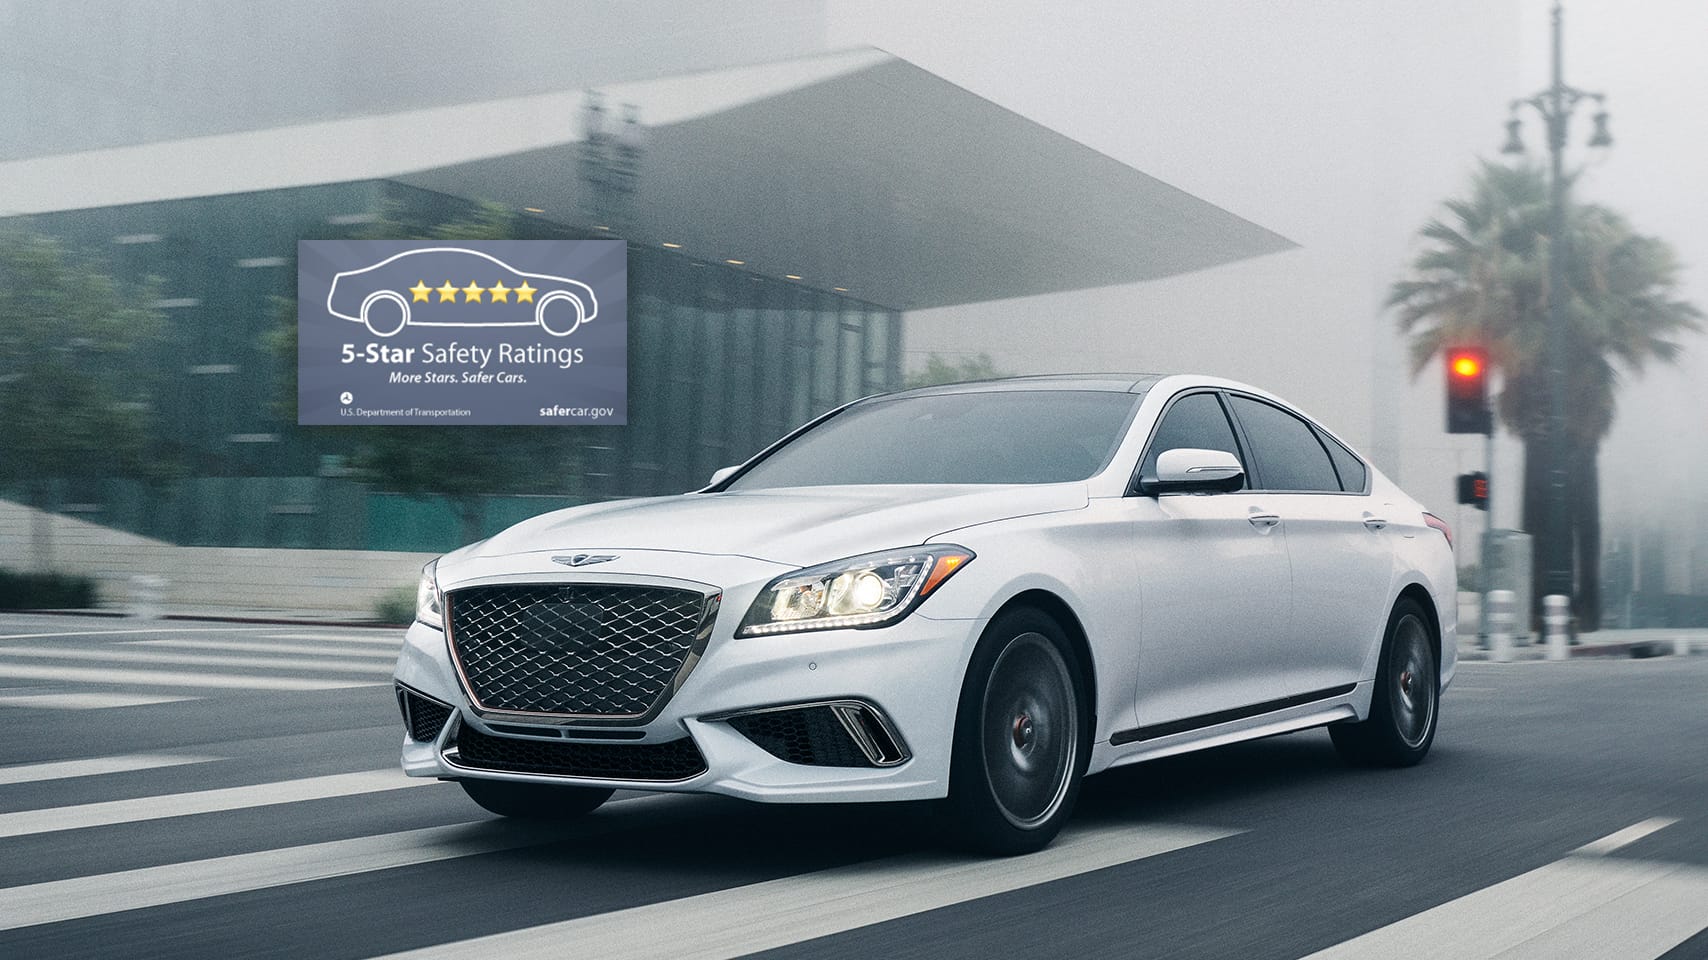 2020 Genesis G80 shown in Uyuni White with National Highway Traffic Safety Administrations award badge.